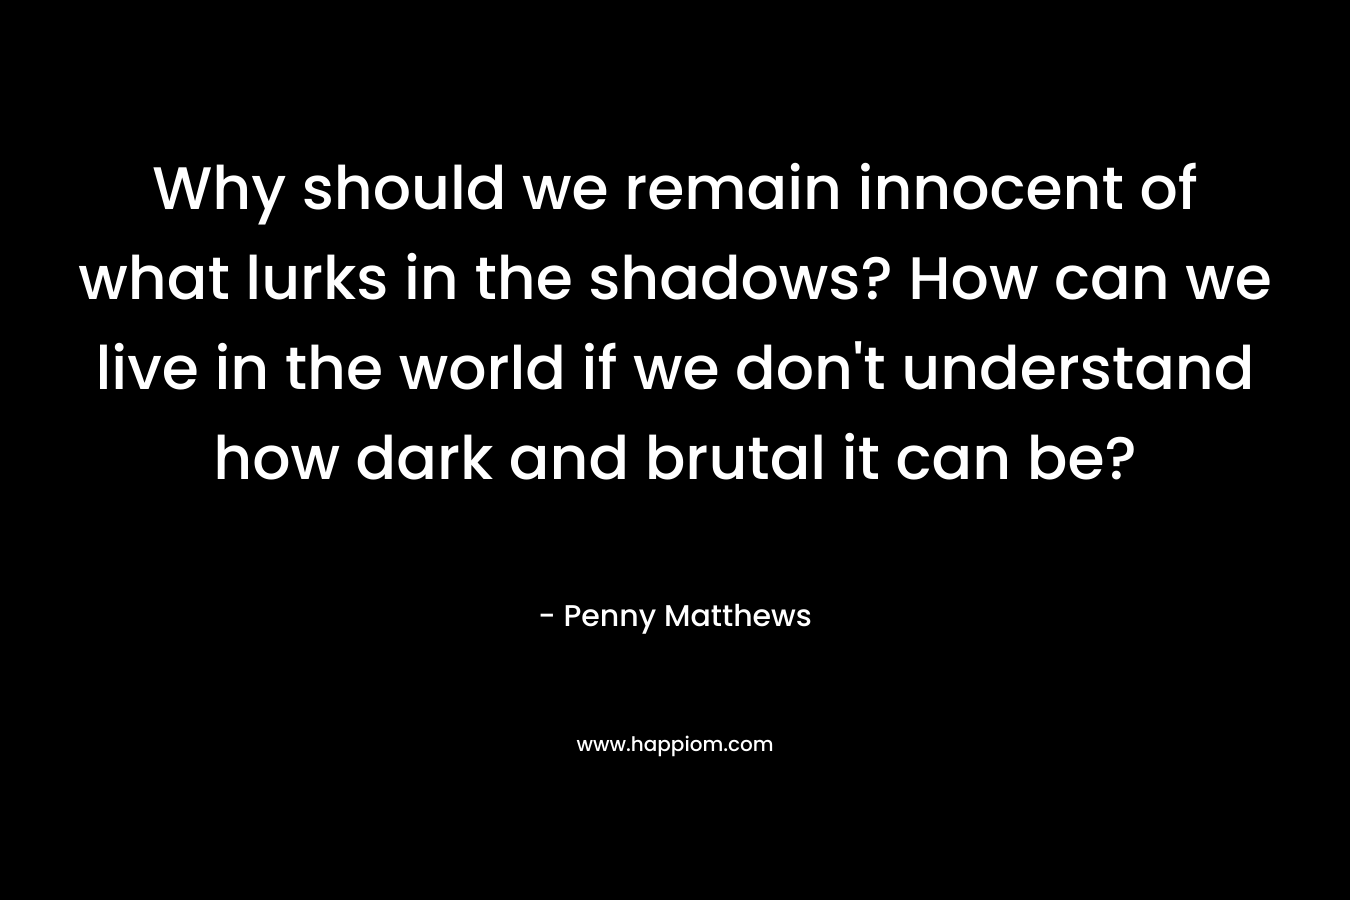 Why should we remain innocent of what lurks in the shadows? How can we live in the world if we don't understand how dark and brutal it can be?